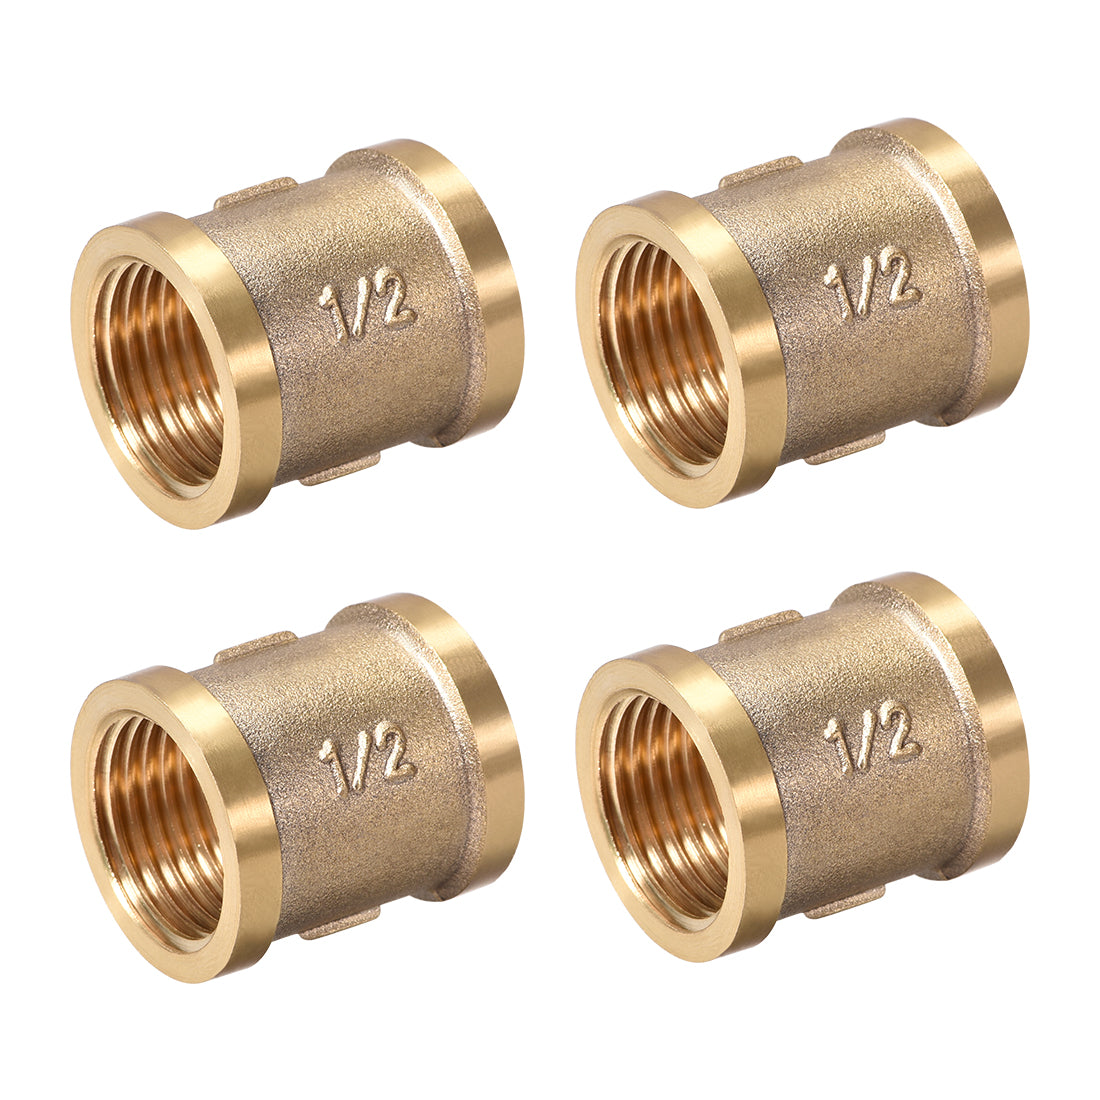 uxcell Uxcell Brass Cast Pipe Fittings Coupling 1/2 x 1/2 G Female Thread Gold Tone 4pcs